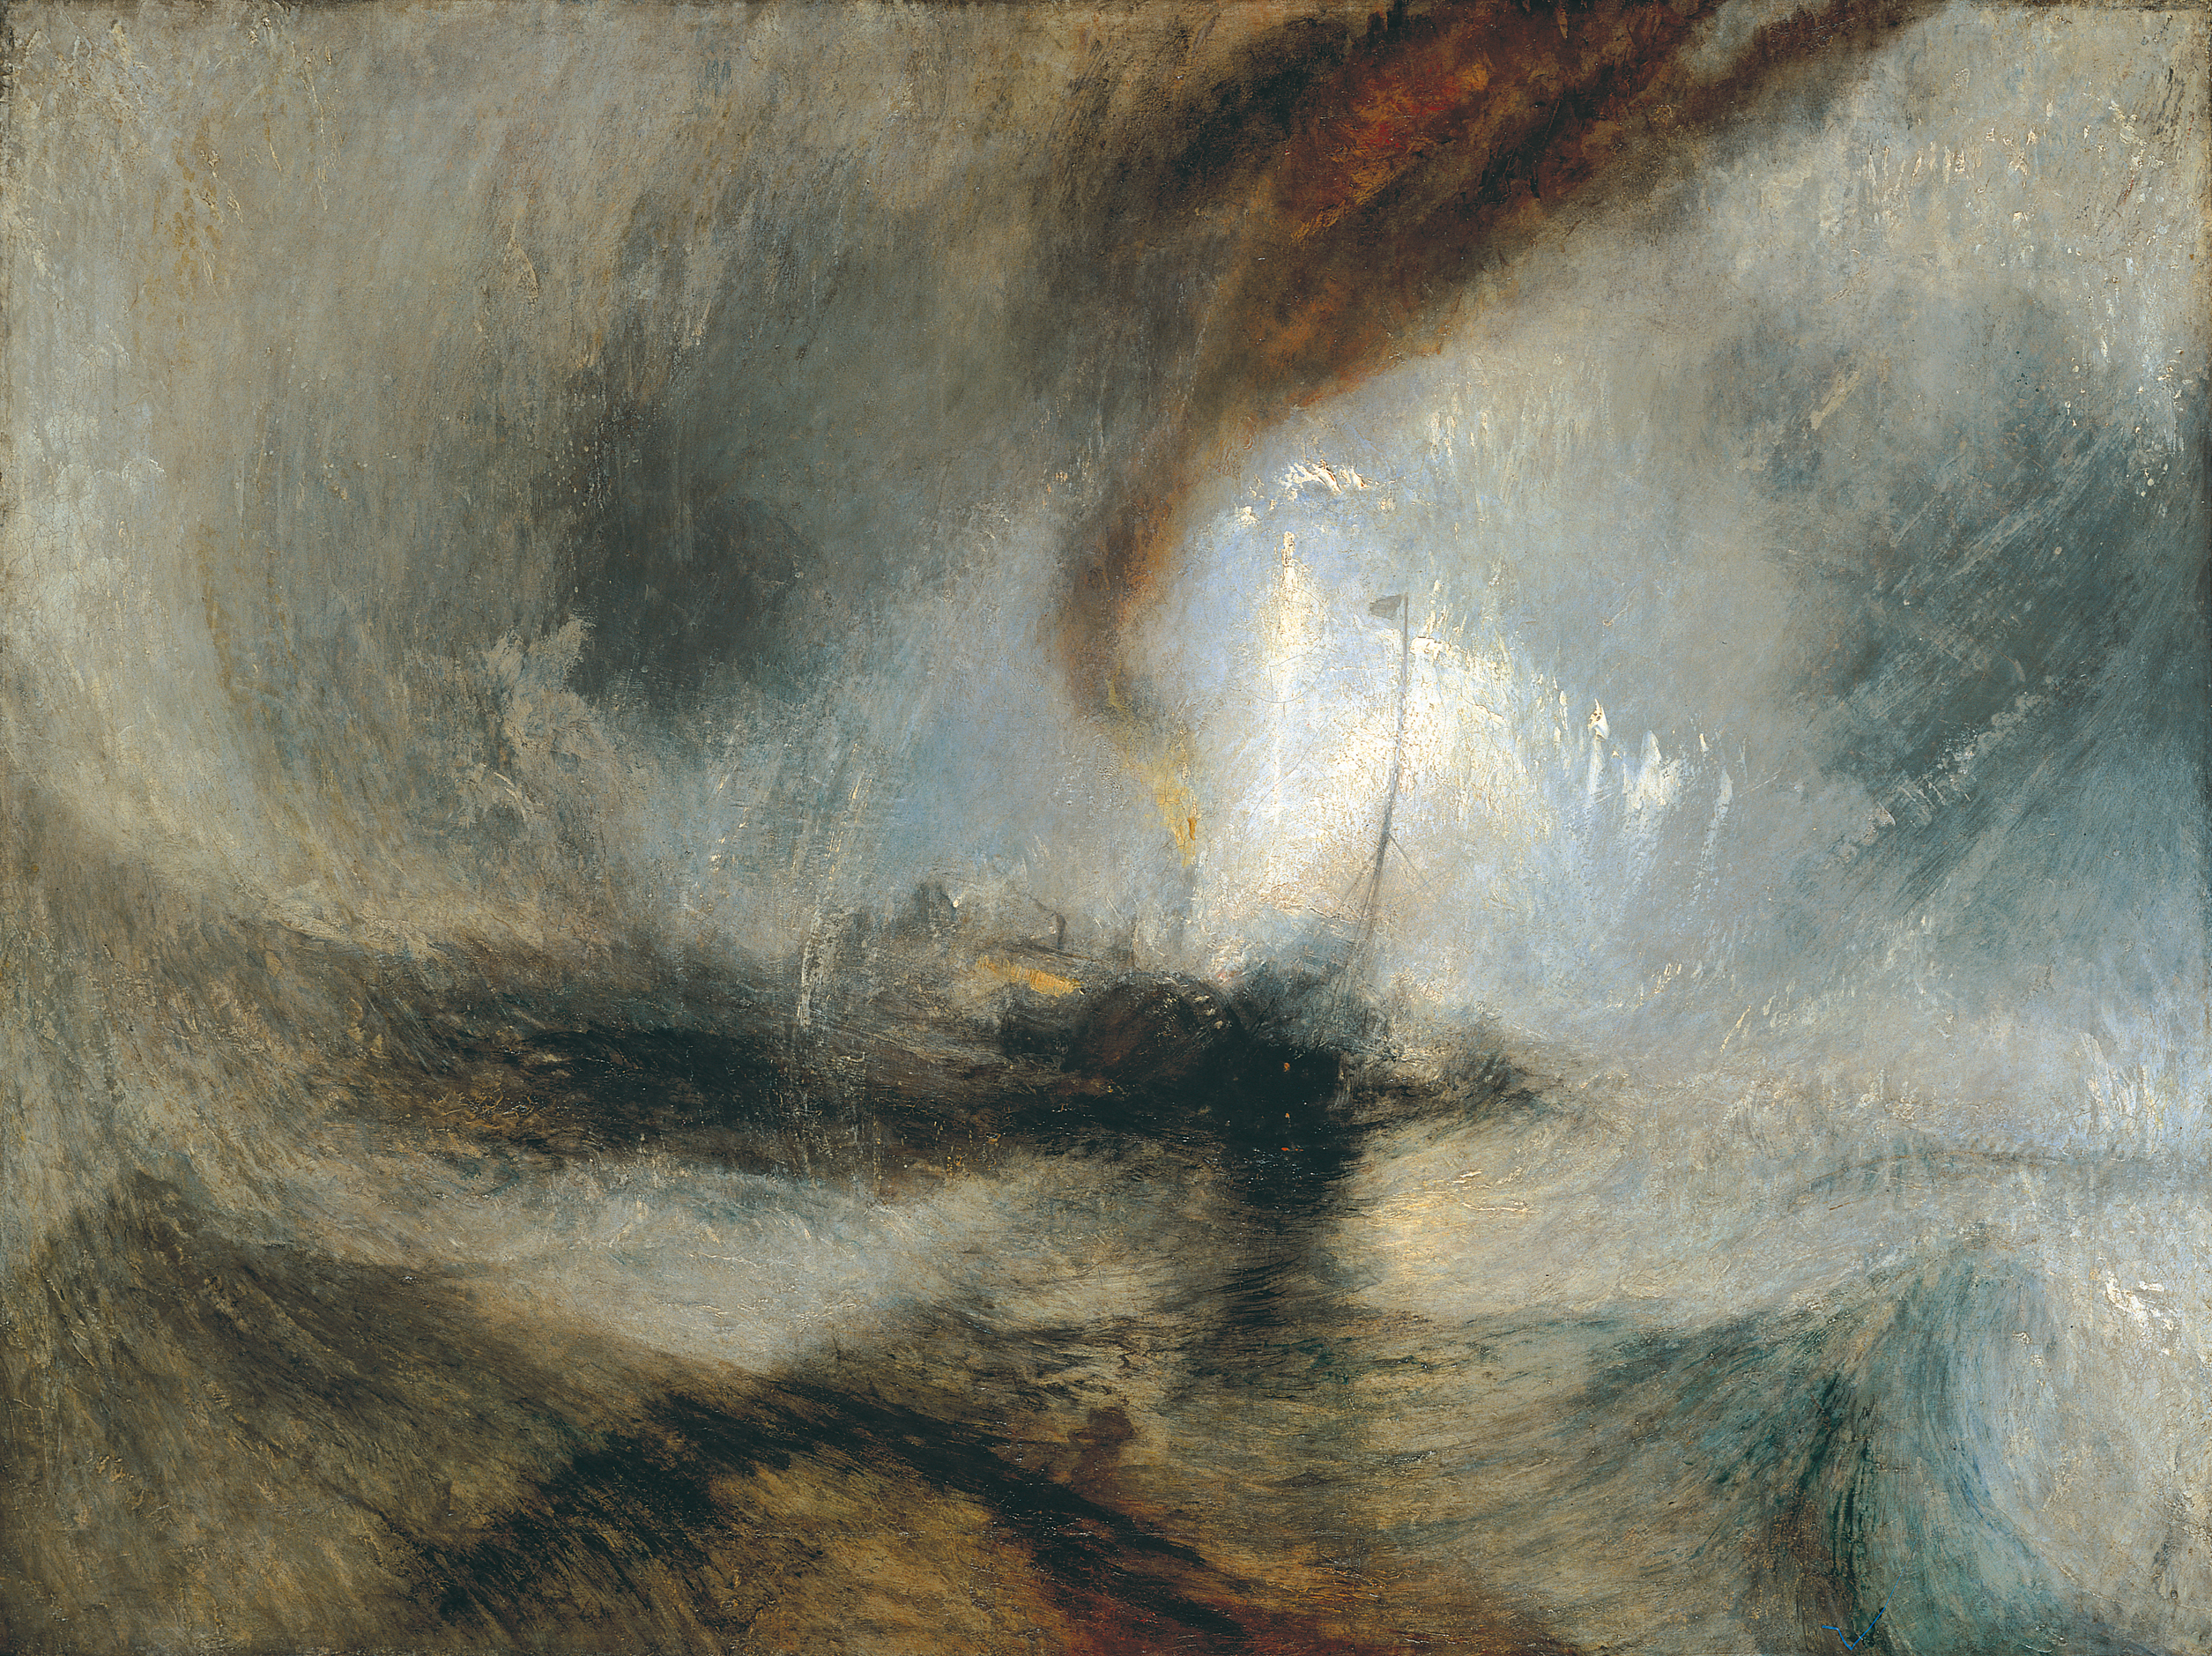 James Mallord William Turner, Snow Storm – Steam-Boat off a Harbour's Mouth Making Signals in Shallow Water, and going by the Lead. The Author was in this Storm on the Night the "Ariel" left Harwich), 1842, Oil on canvas, 91 cm × 122 cm (Tate Britain, London)